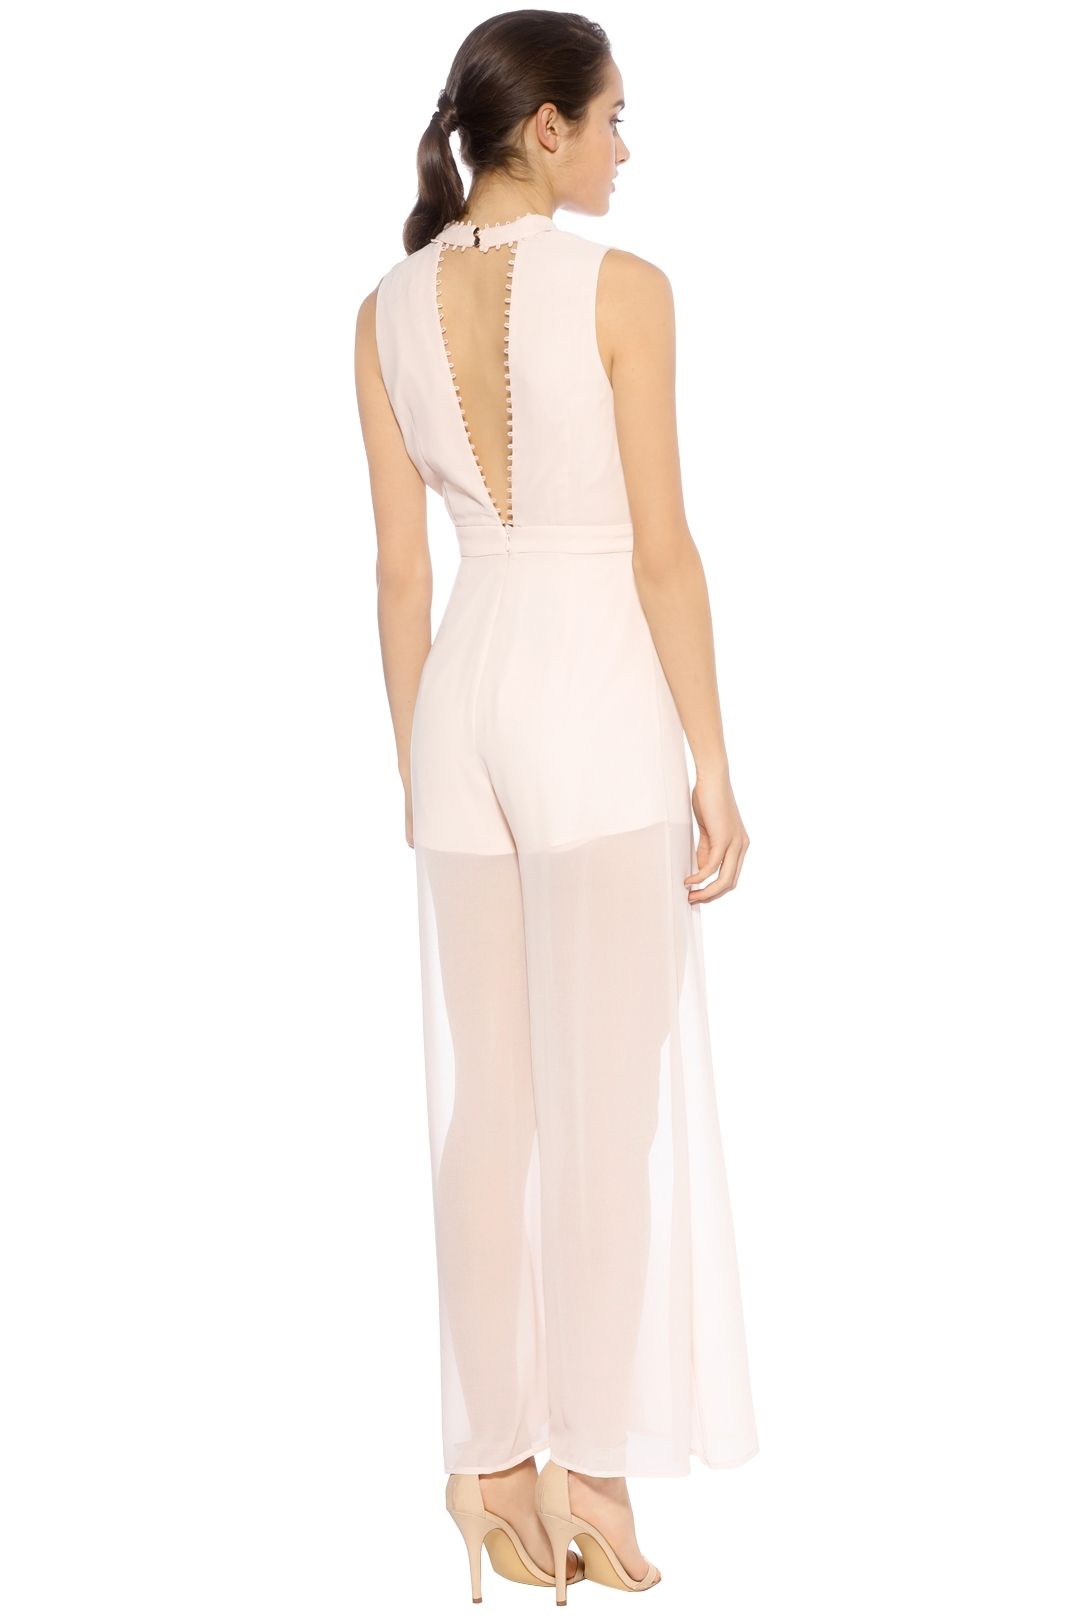 Keepsake The Label - Come Around Jumpsuit Shell - Pink - Back